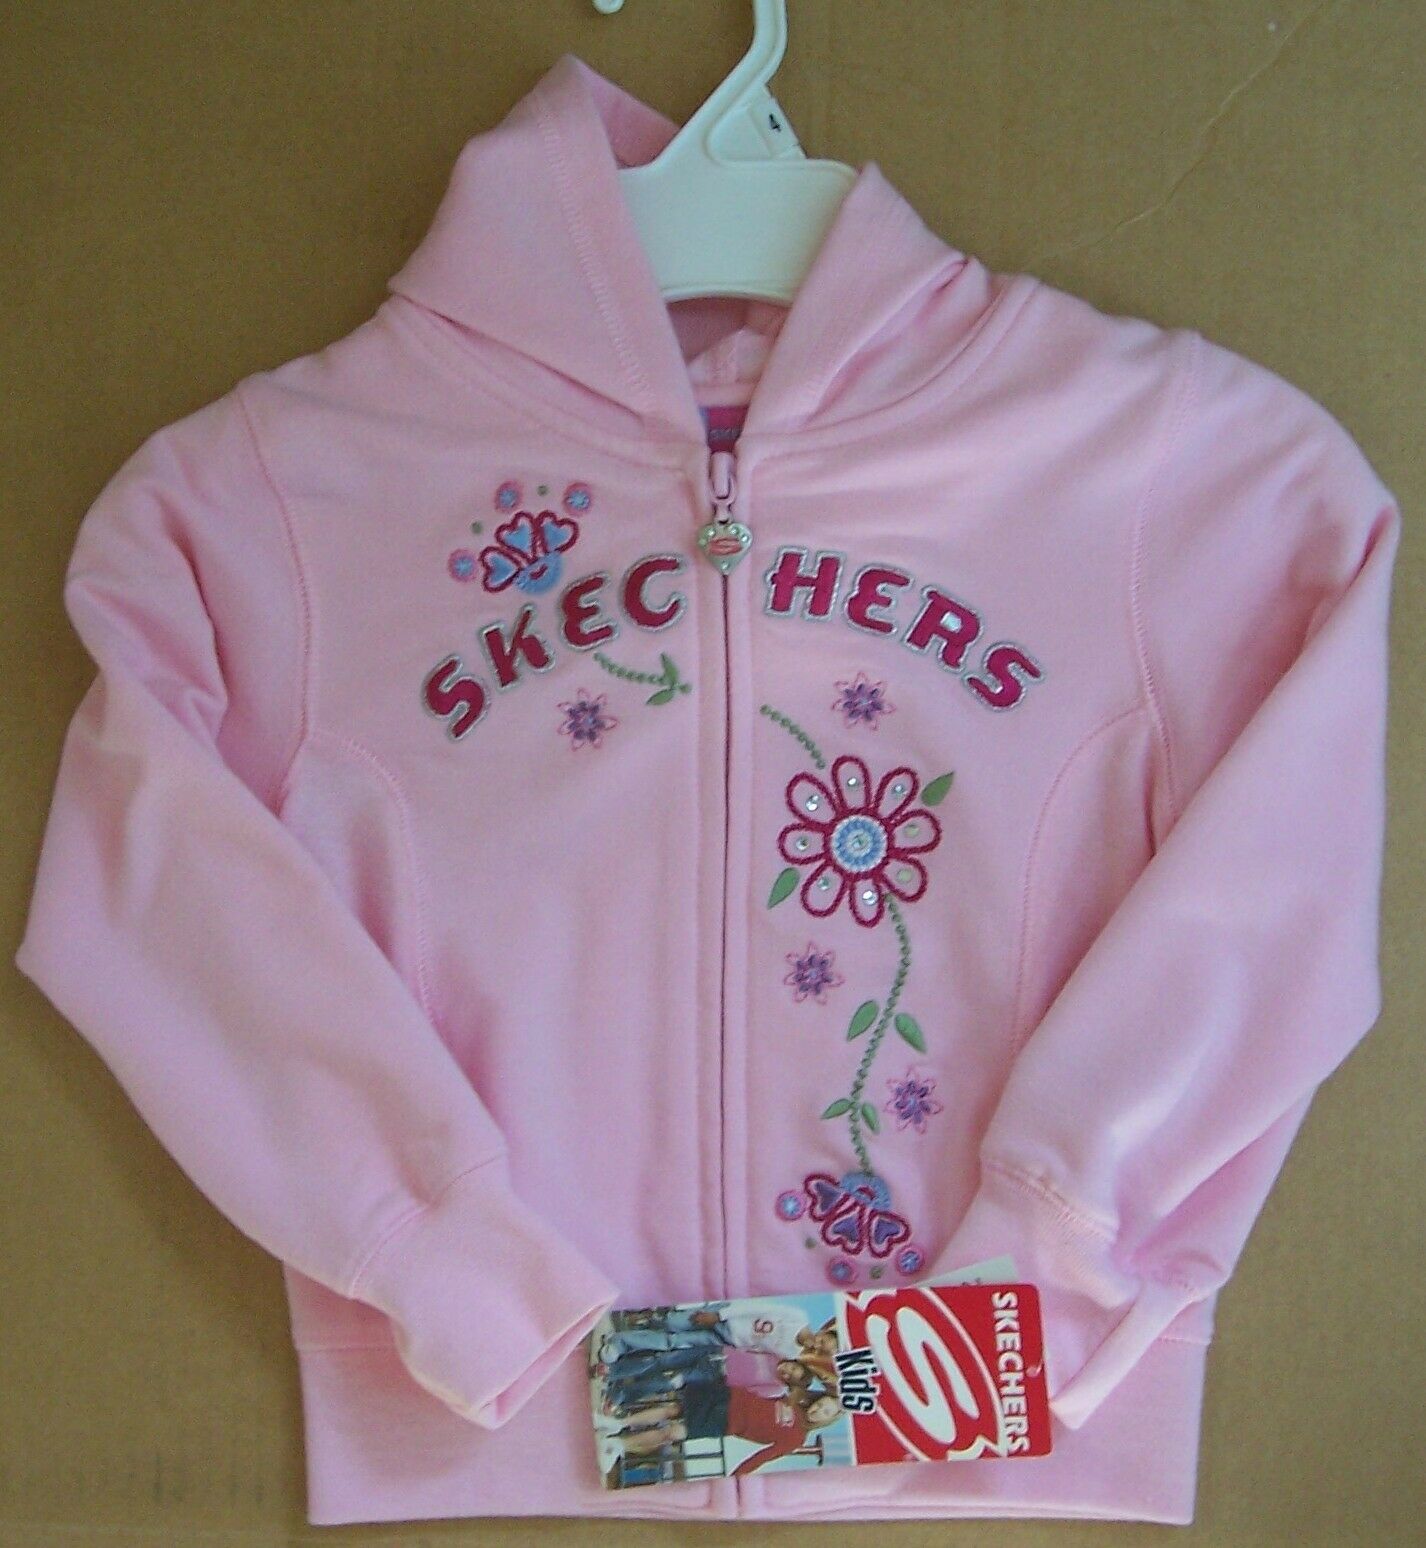 Skechers Girls Pink Zip Front Hooded Jacket Size 4 Nwt